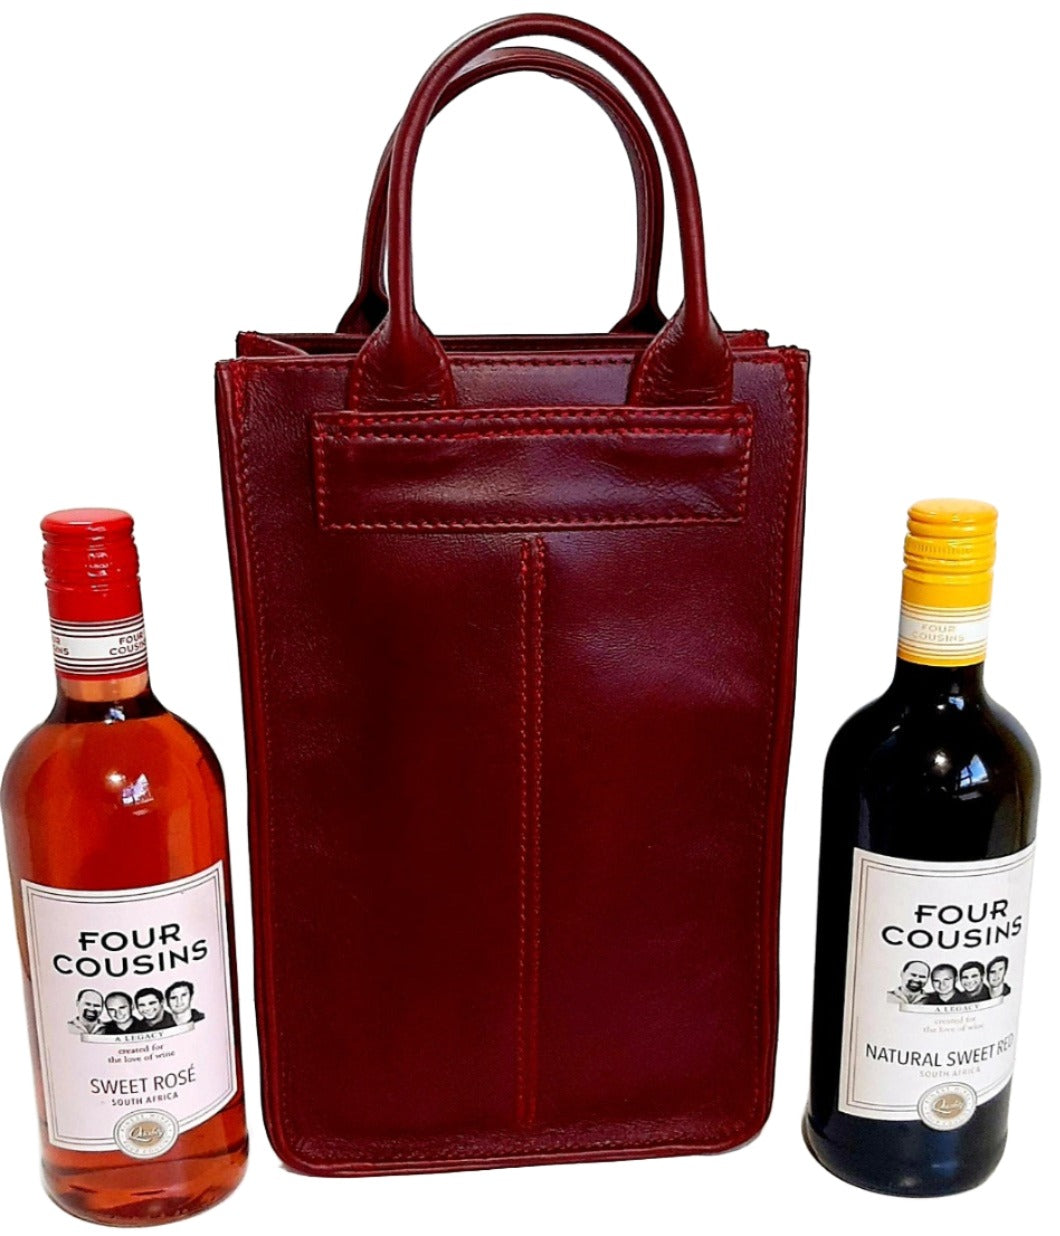 Cape wine bags by Cape Masai Leather cherry red